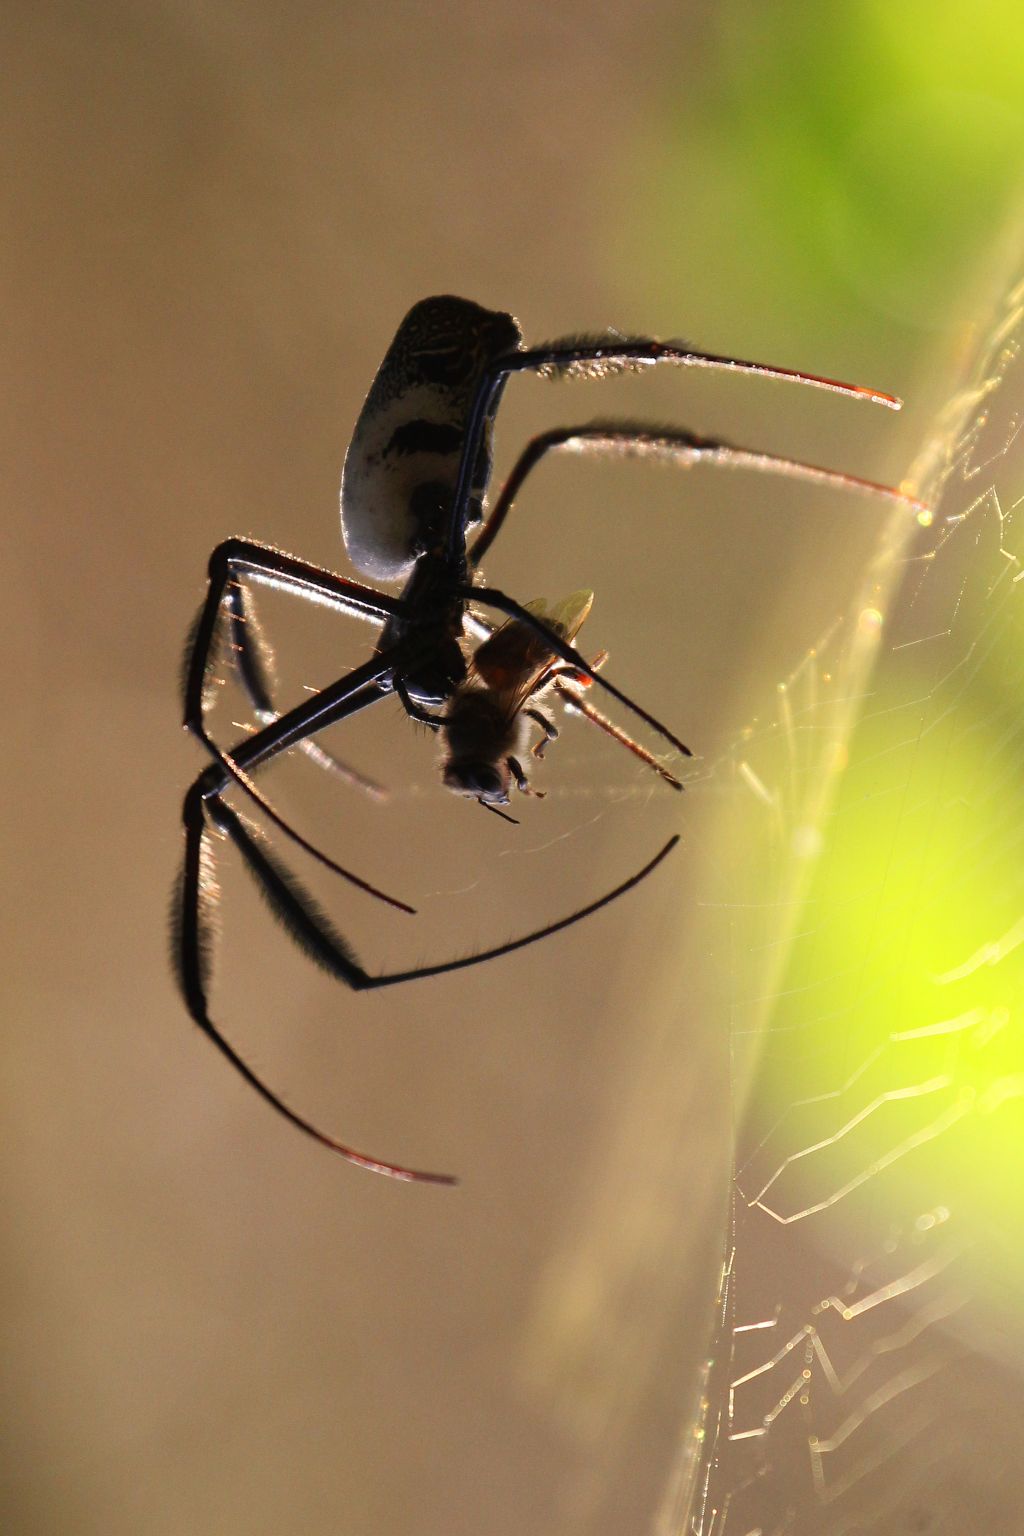 A close-up of a Golden orb-web spider; Tetragnathidae Nephilinae Nephila senegalensis, in the act of catching a bee in its web. Photographed in Kirstenbosch National Botanical Gardens, Cape Town, Western Cape Province, South Africa. Long lens with large